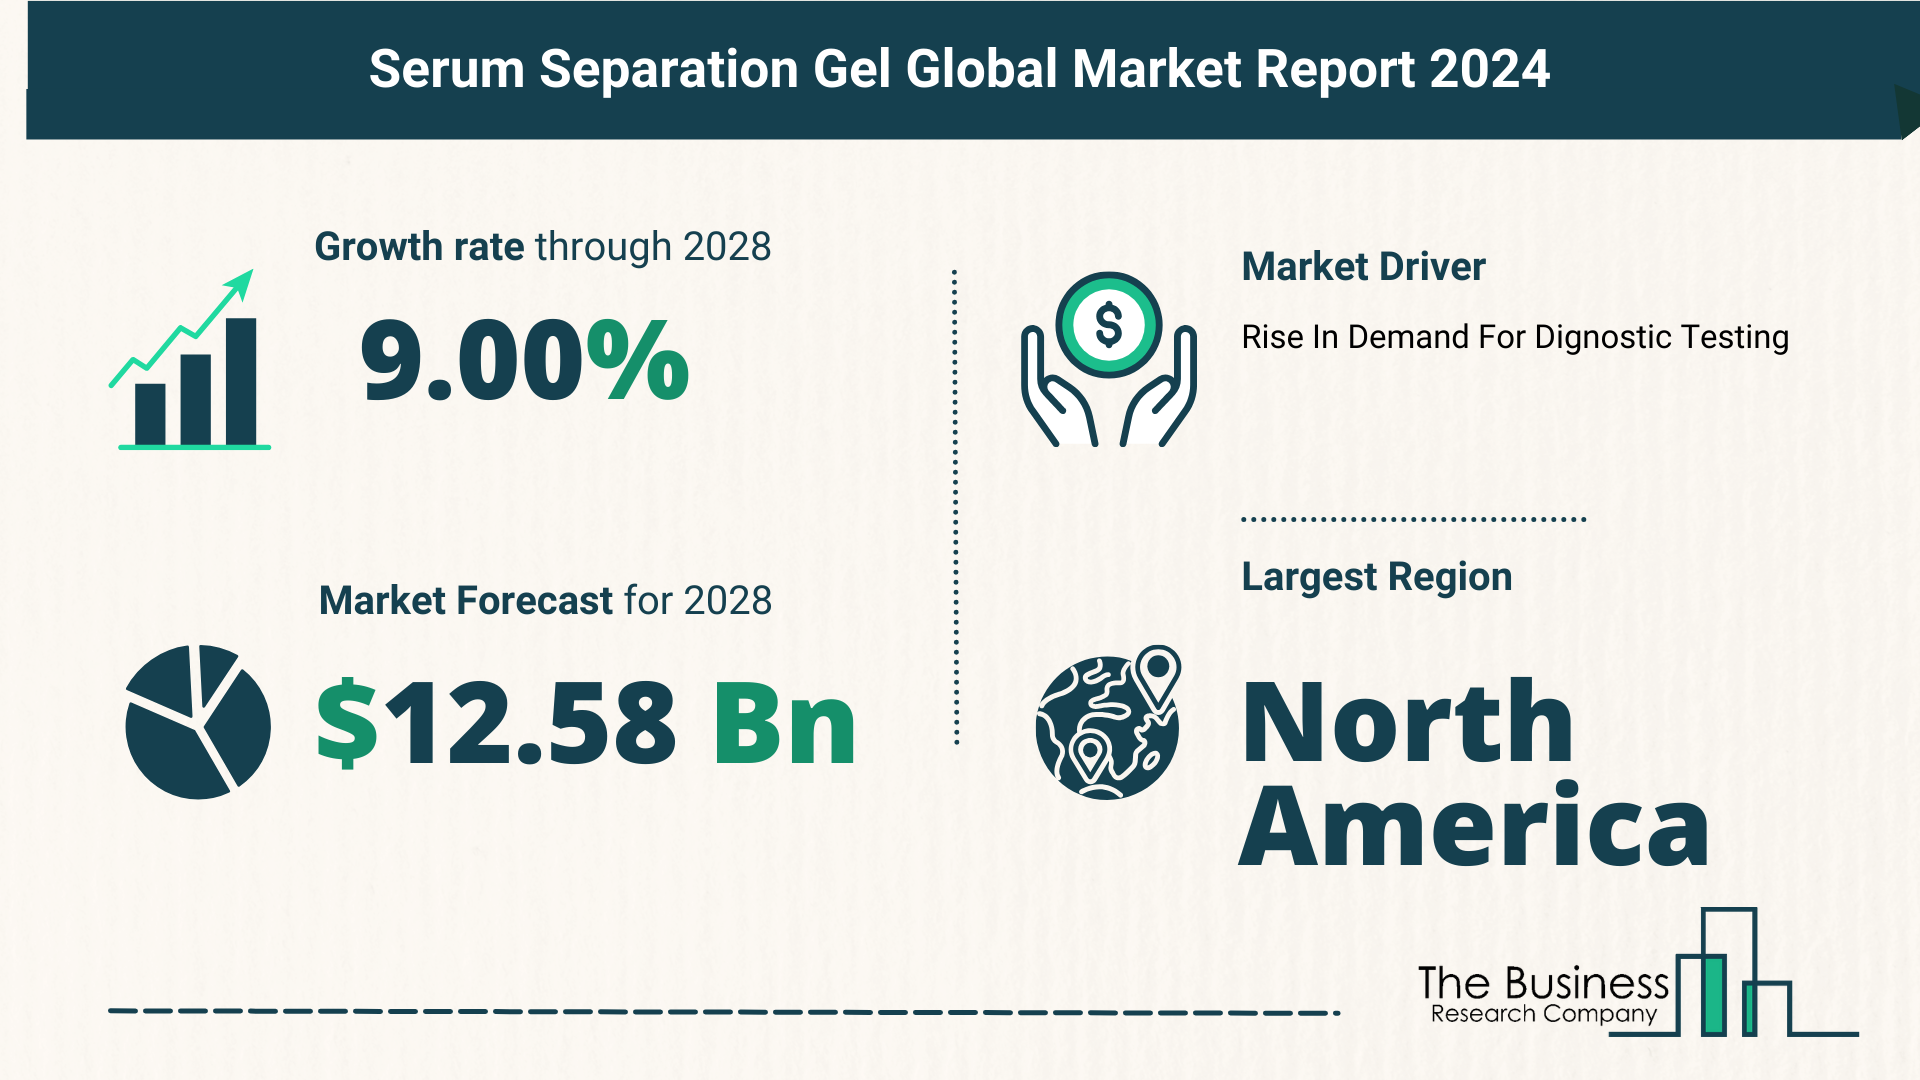 How Is The Serum Separation Gel Market Expected To Grow Through 2024-2033